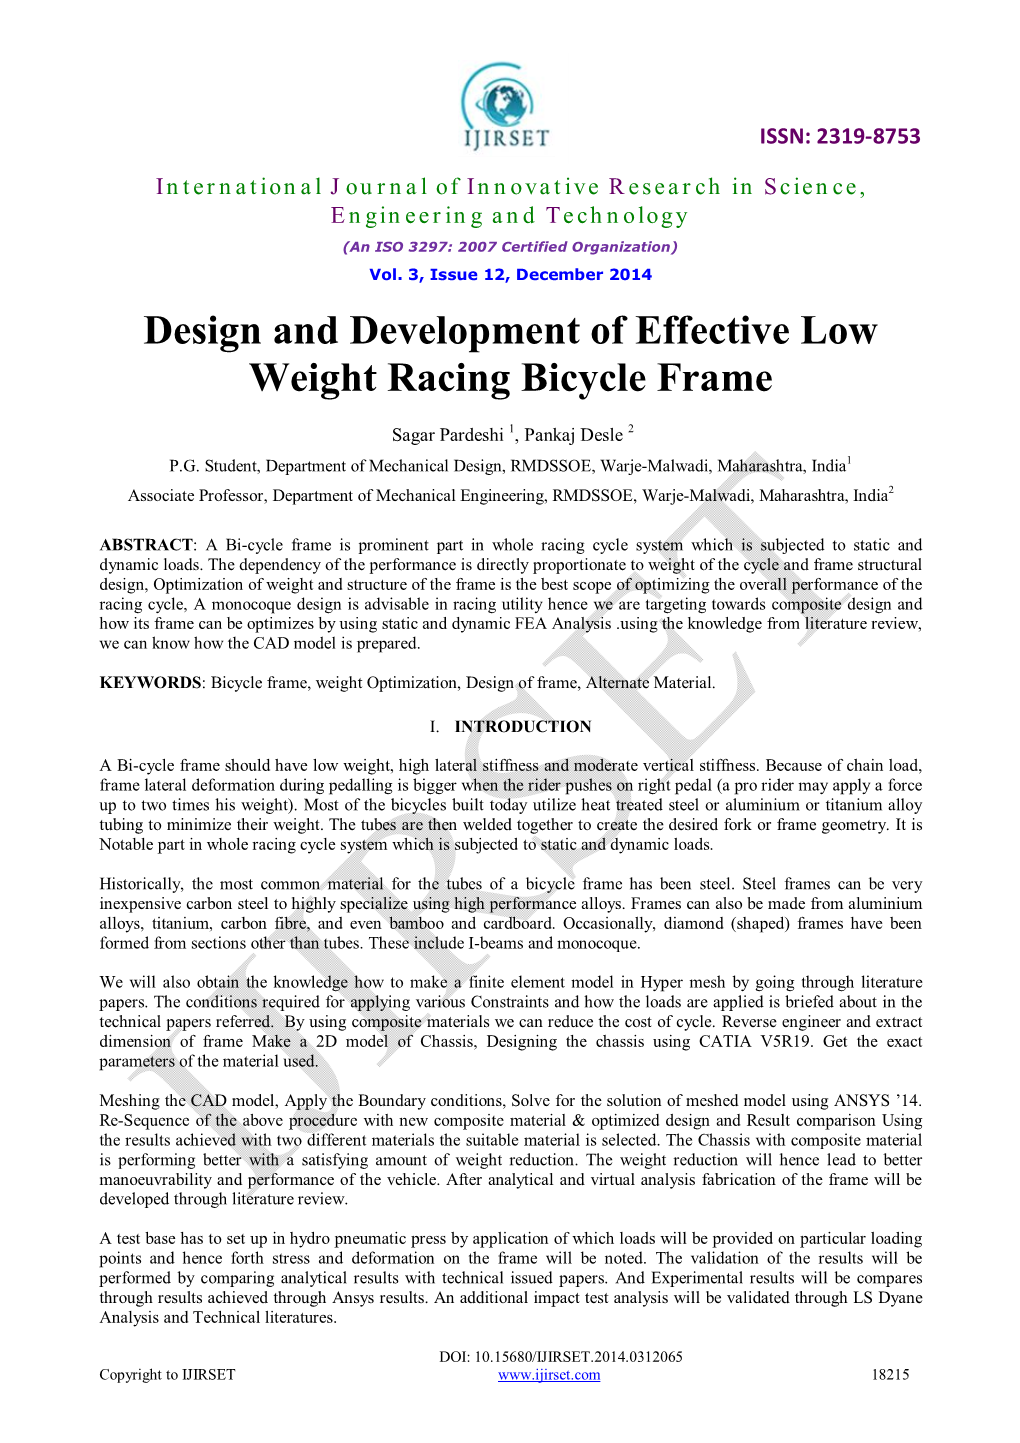 Design and Development of Effective Low Weight Racing Bicycle Frame